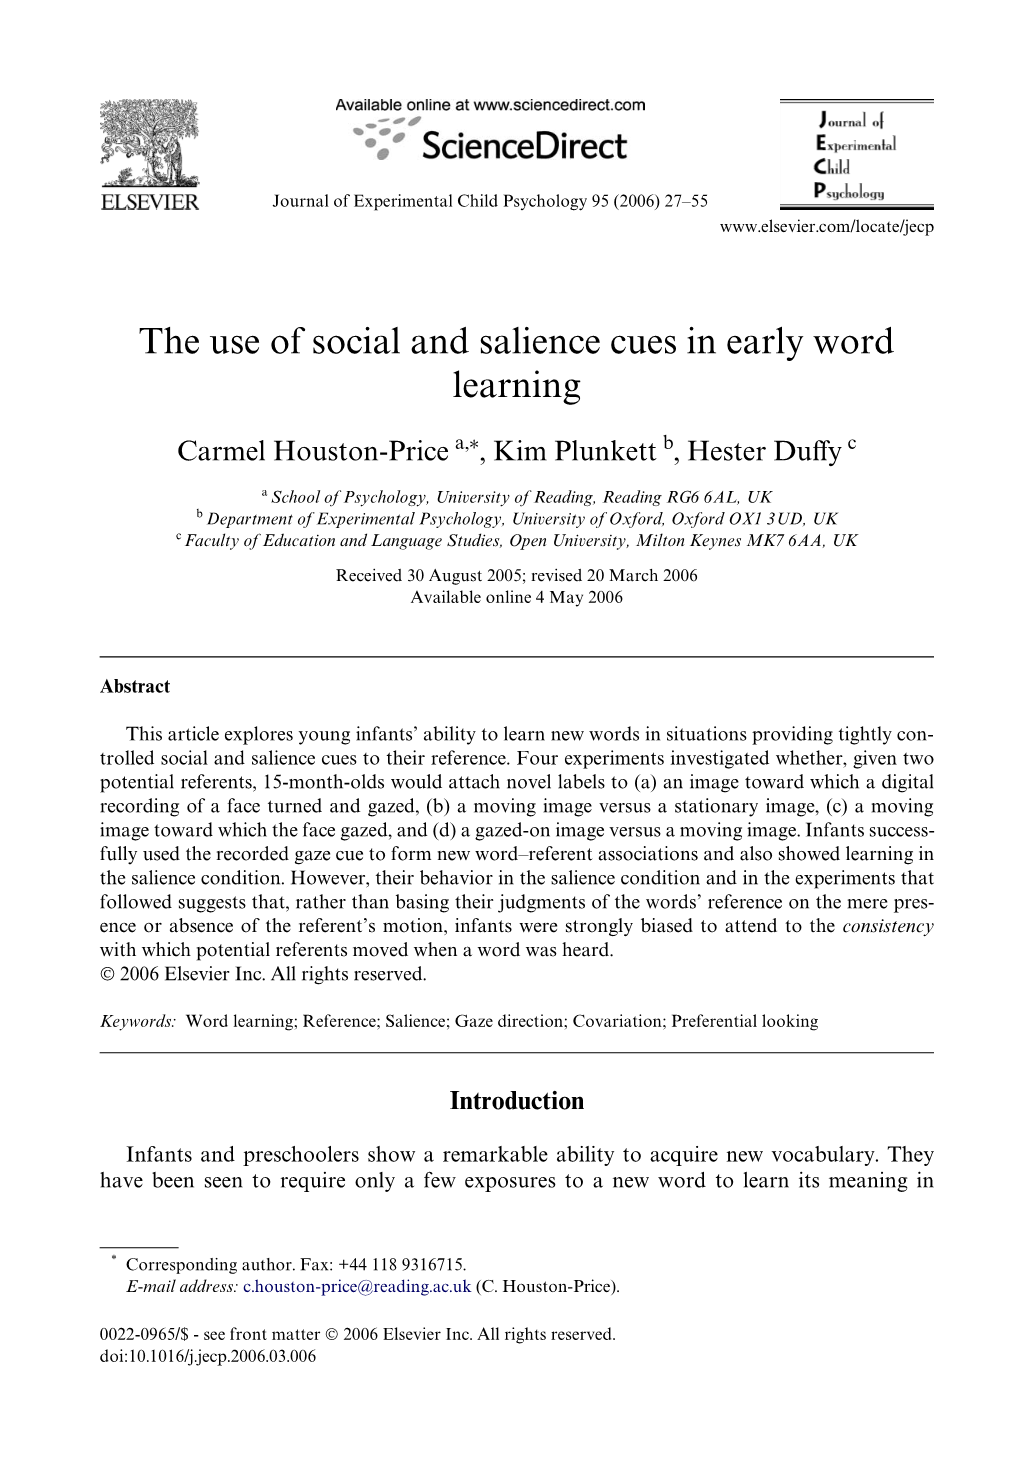 The Use of Social and Salience Cues in Early Word Learning